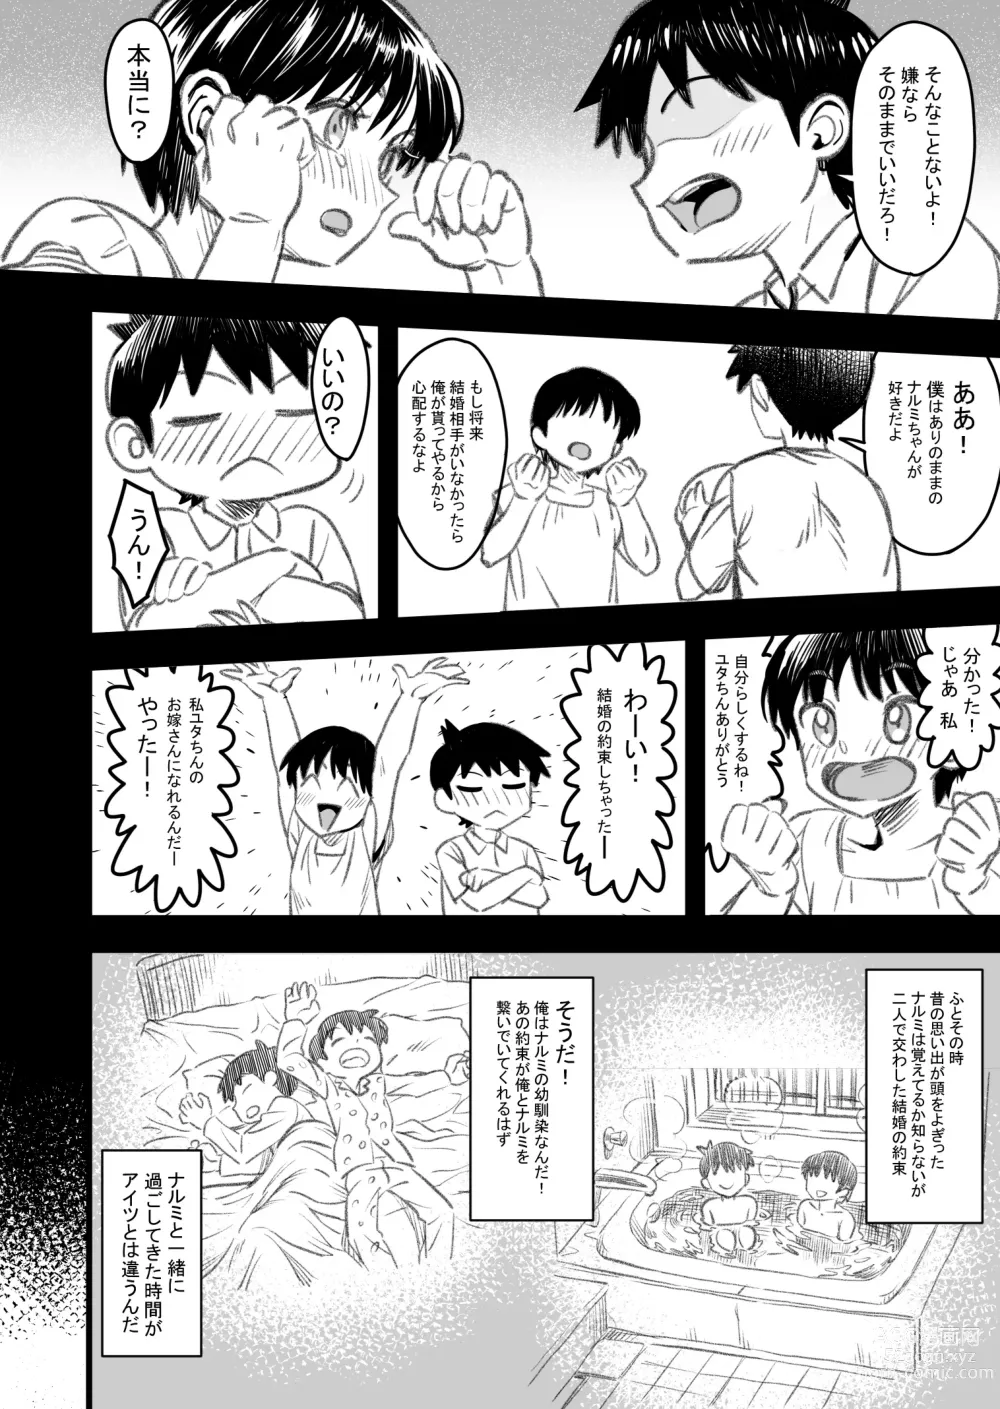 Page 13 of doujinshi How will the Protagonist's Brain be destroyed?